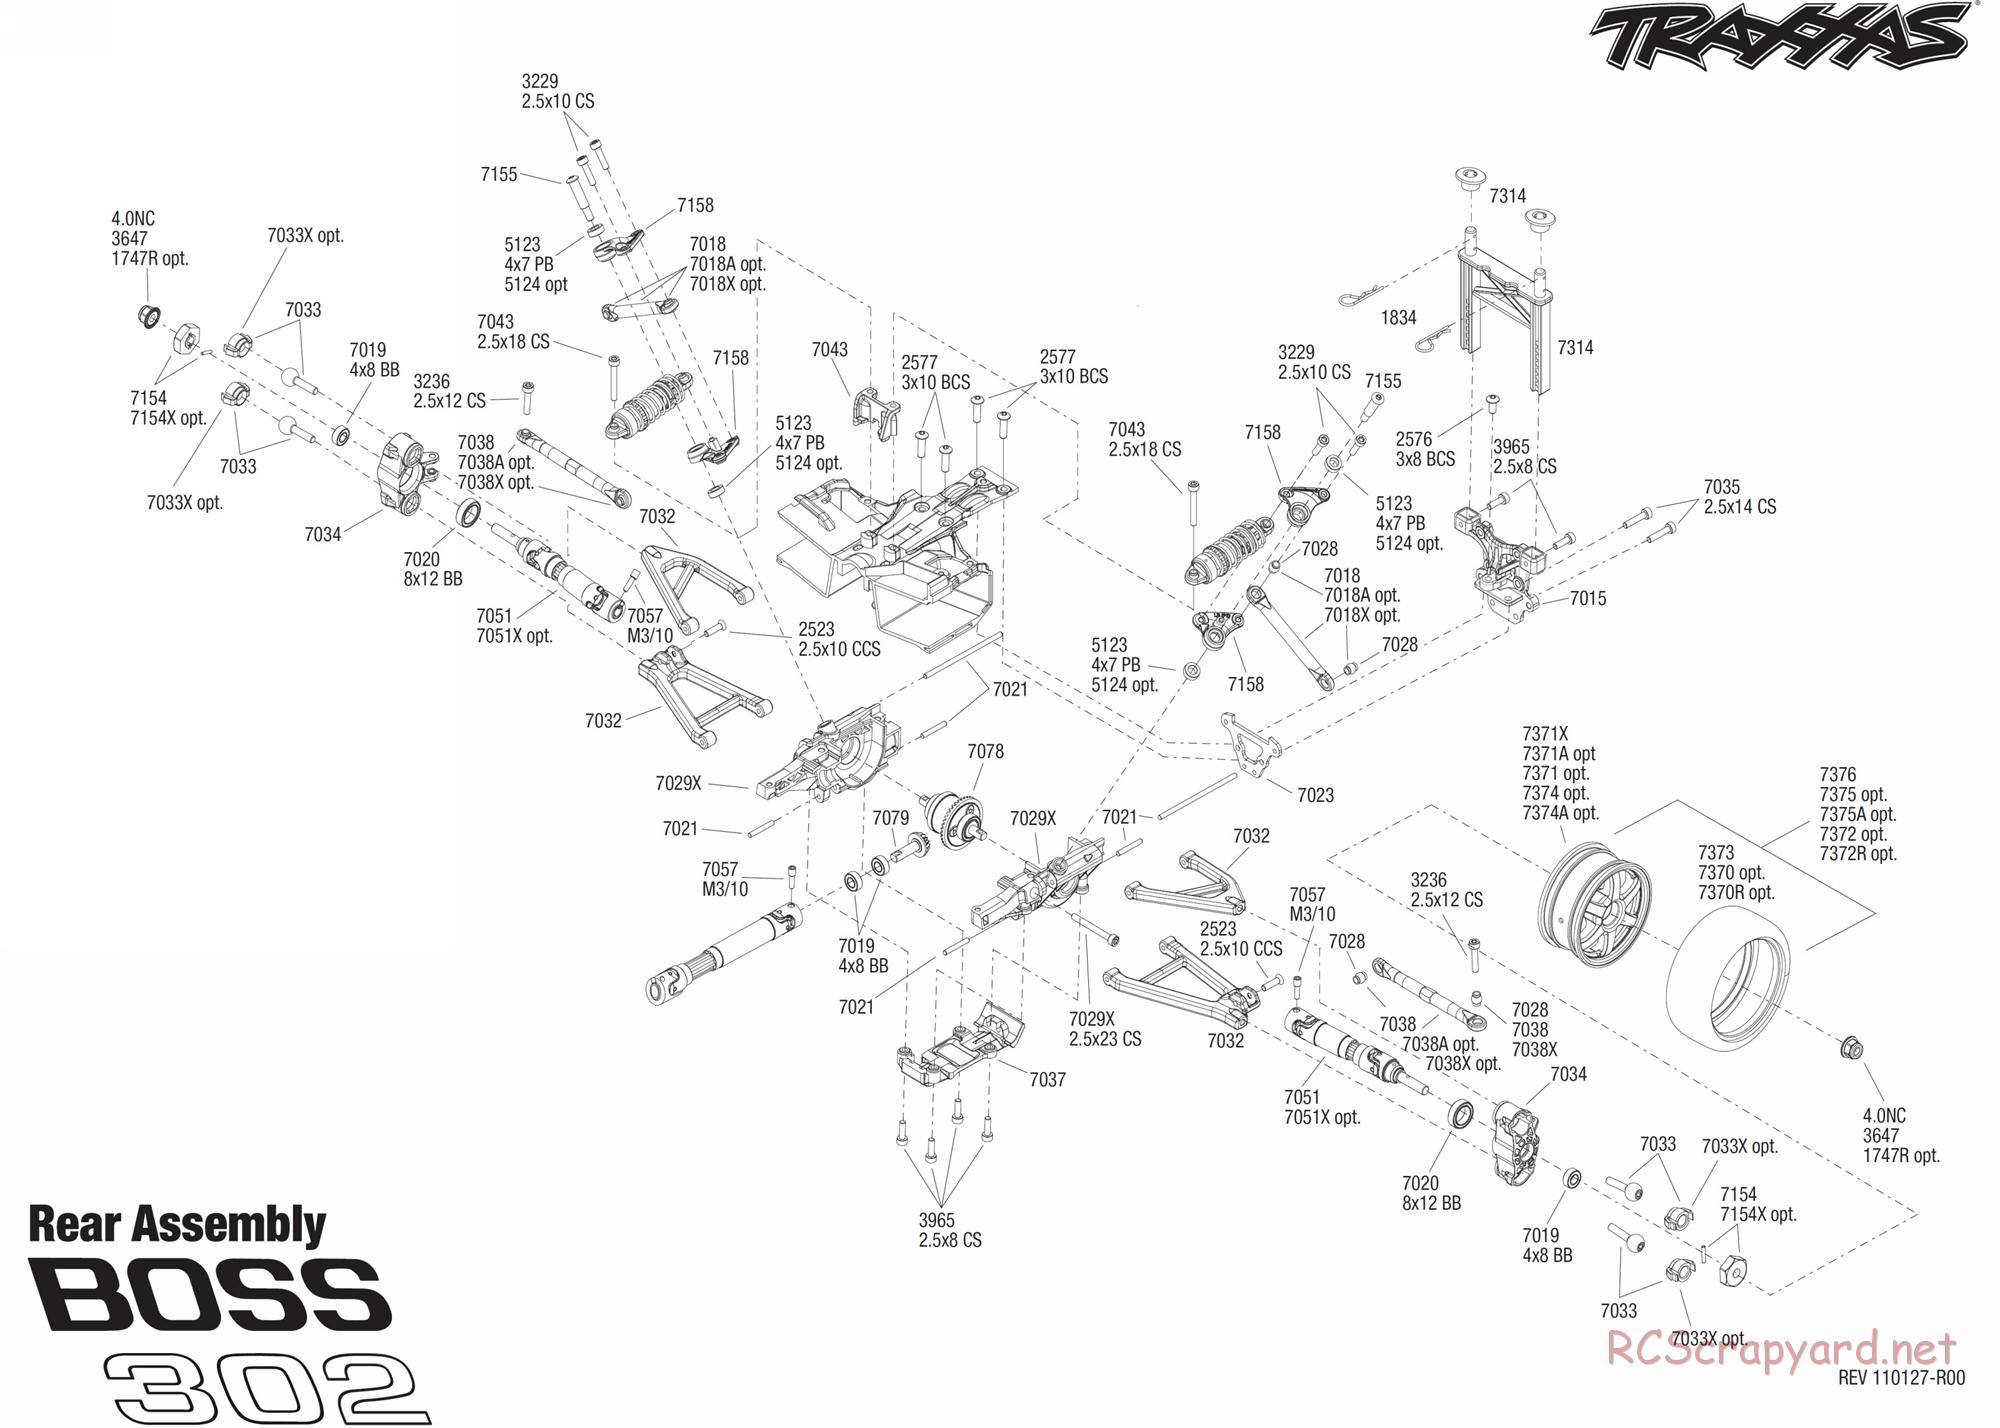 Traxxas - 1/16 Ford Mustang Boss 302 (2011) - Exploded Views - Page 4